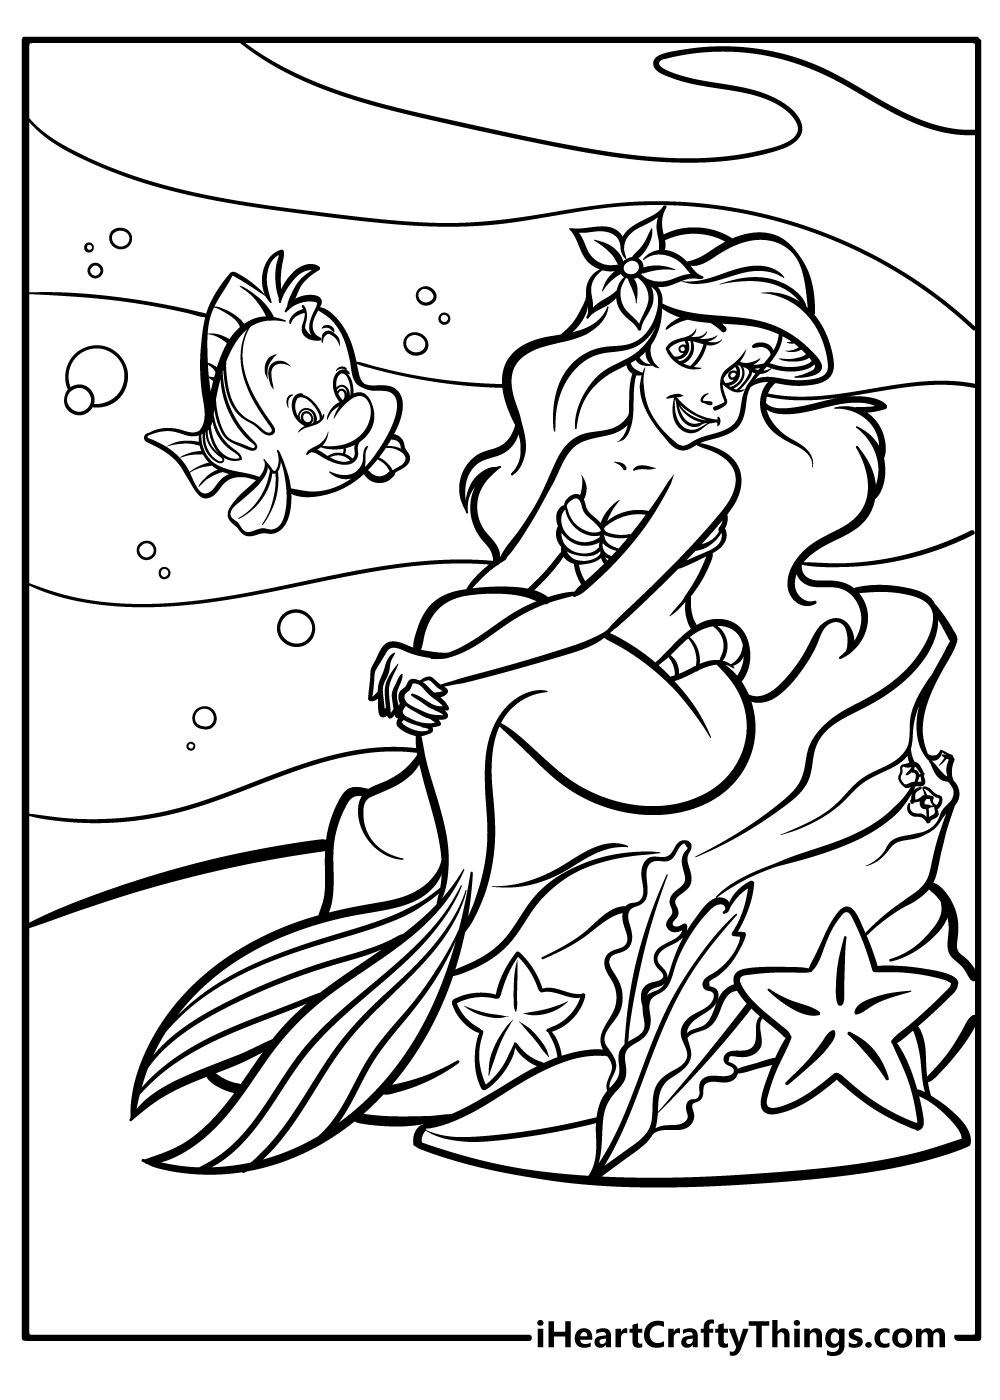 Printable Ariel Coloring Pages Updated 20 - Otakugadgets